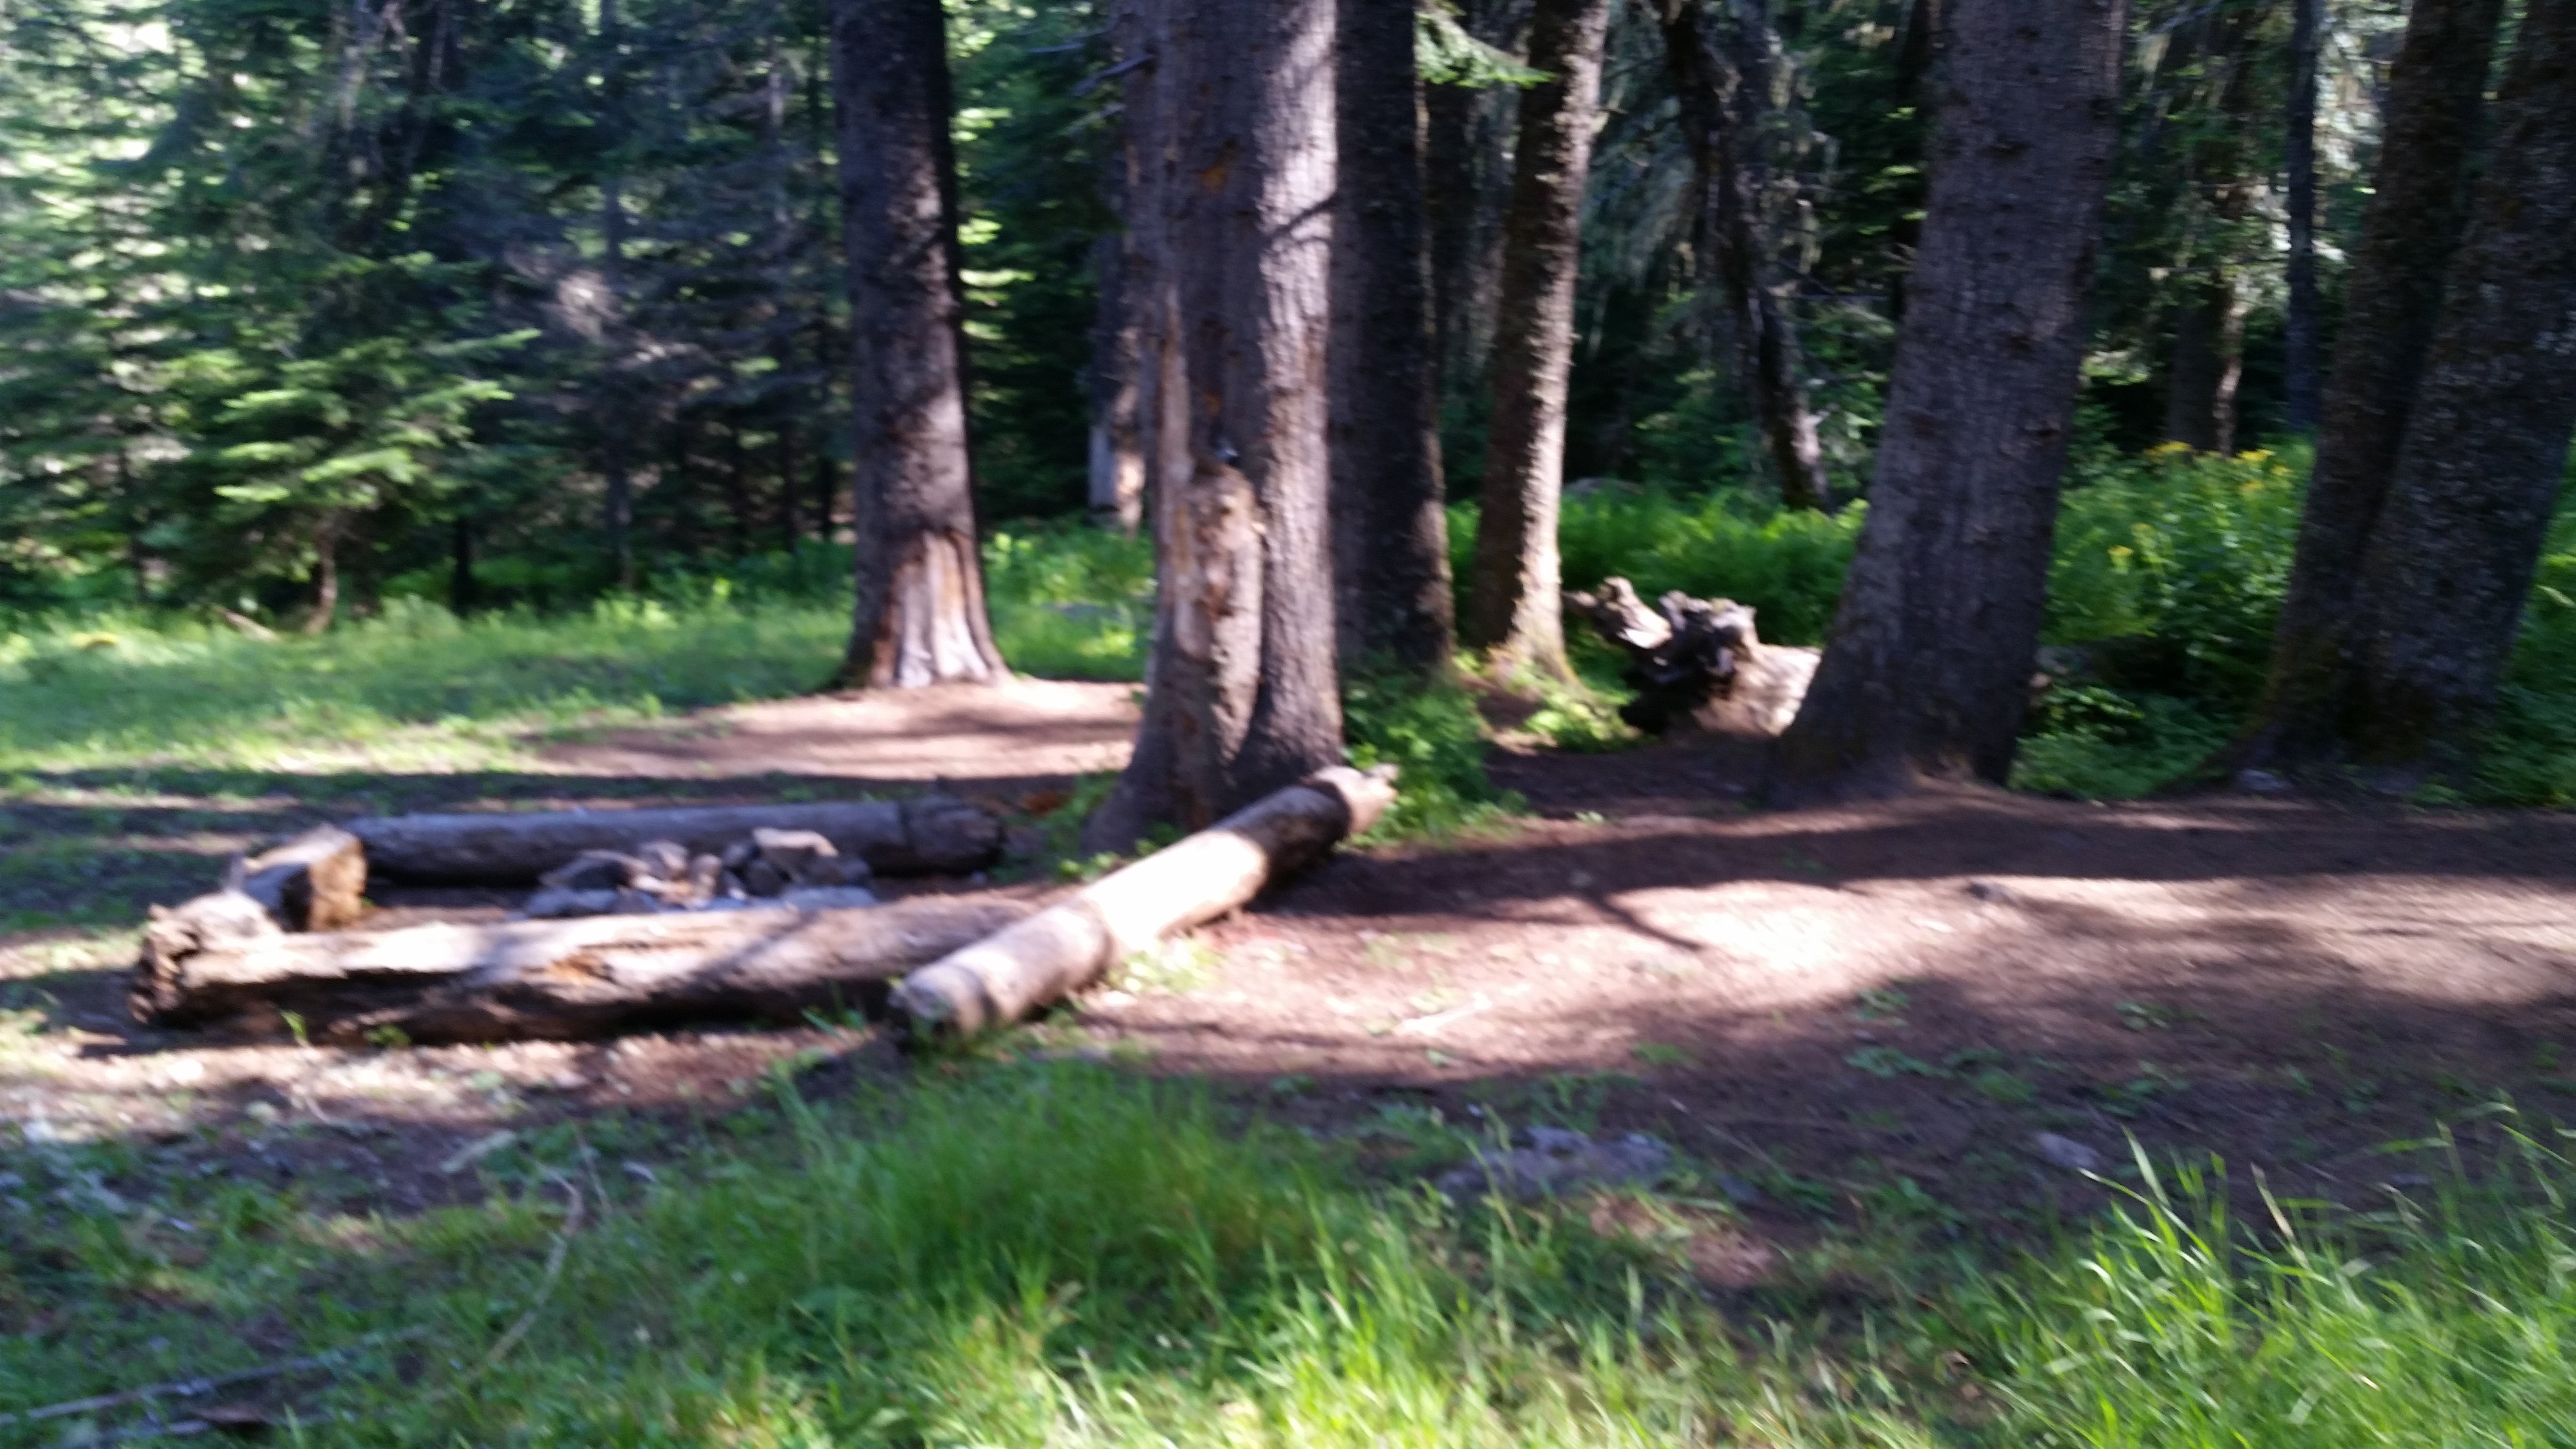 Camper submitted image from Stanley Hot Springs - Backcountry Dispersed Campsite - 1